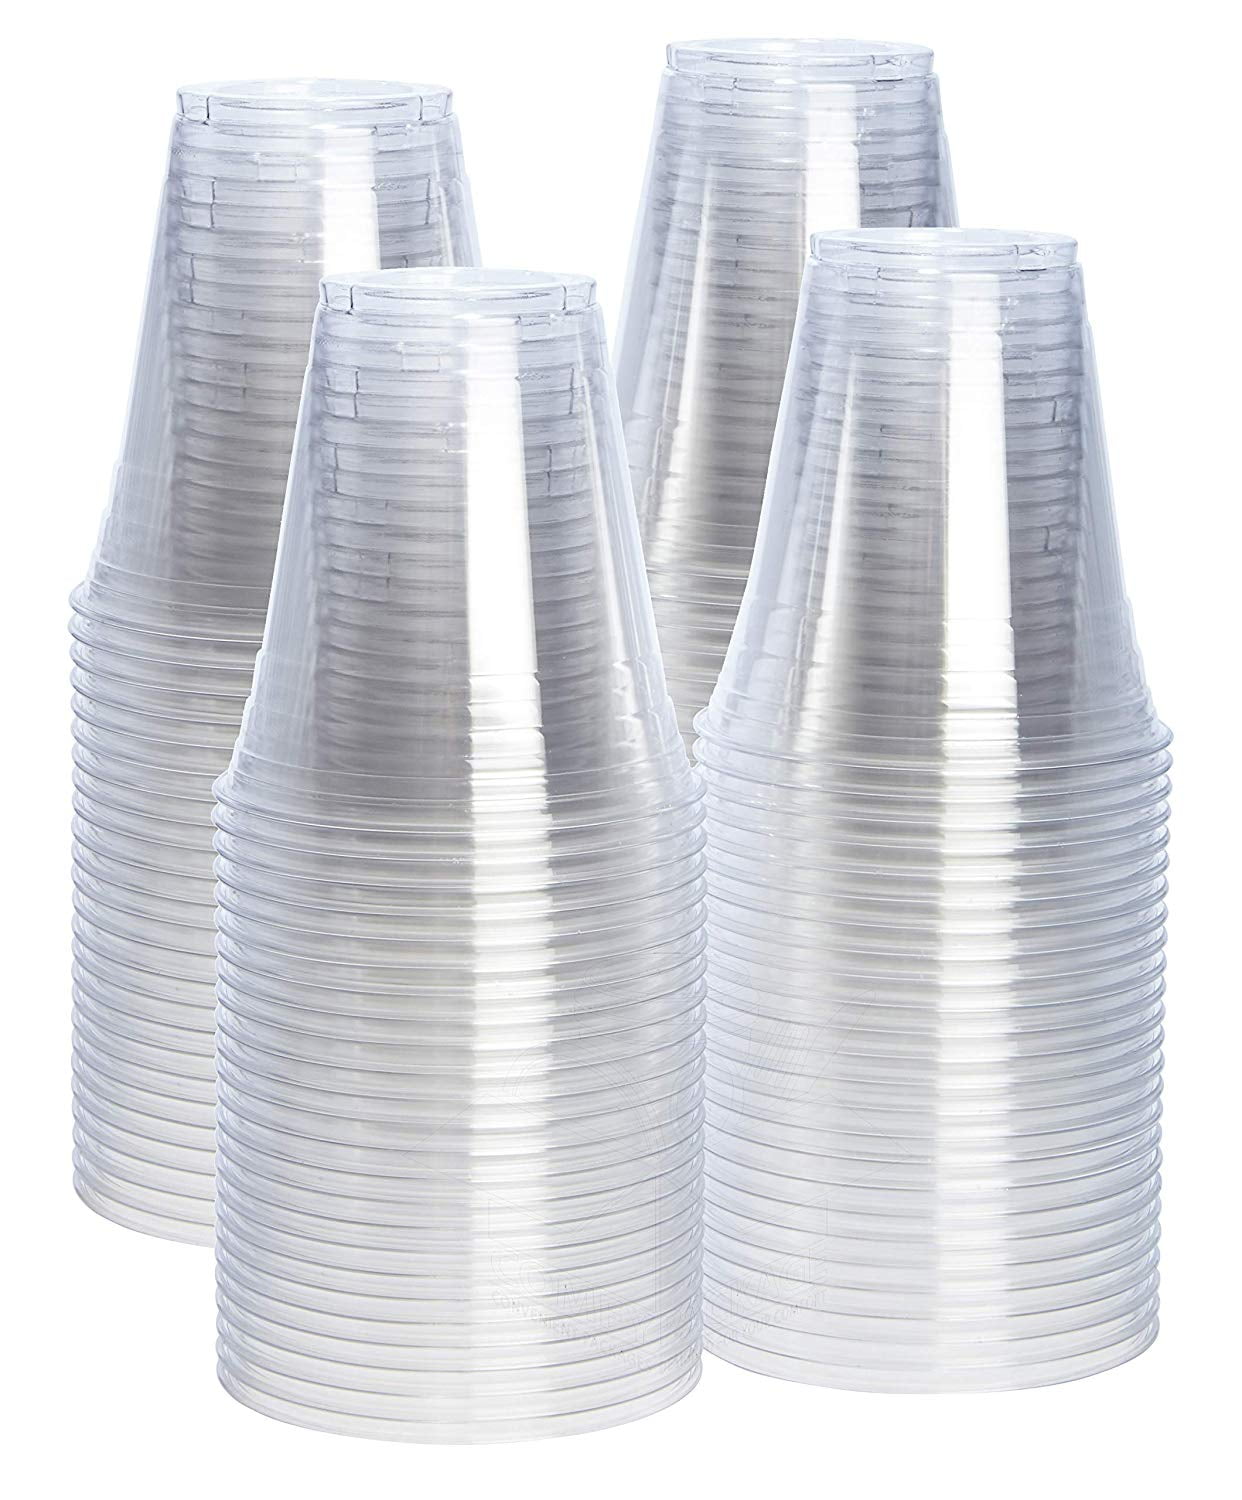 Comfy Package [100 Pack - 12 oz.] Crystal Clear PET Plastic Cups